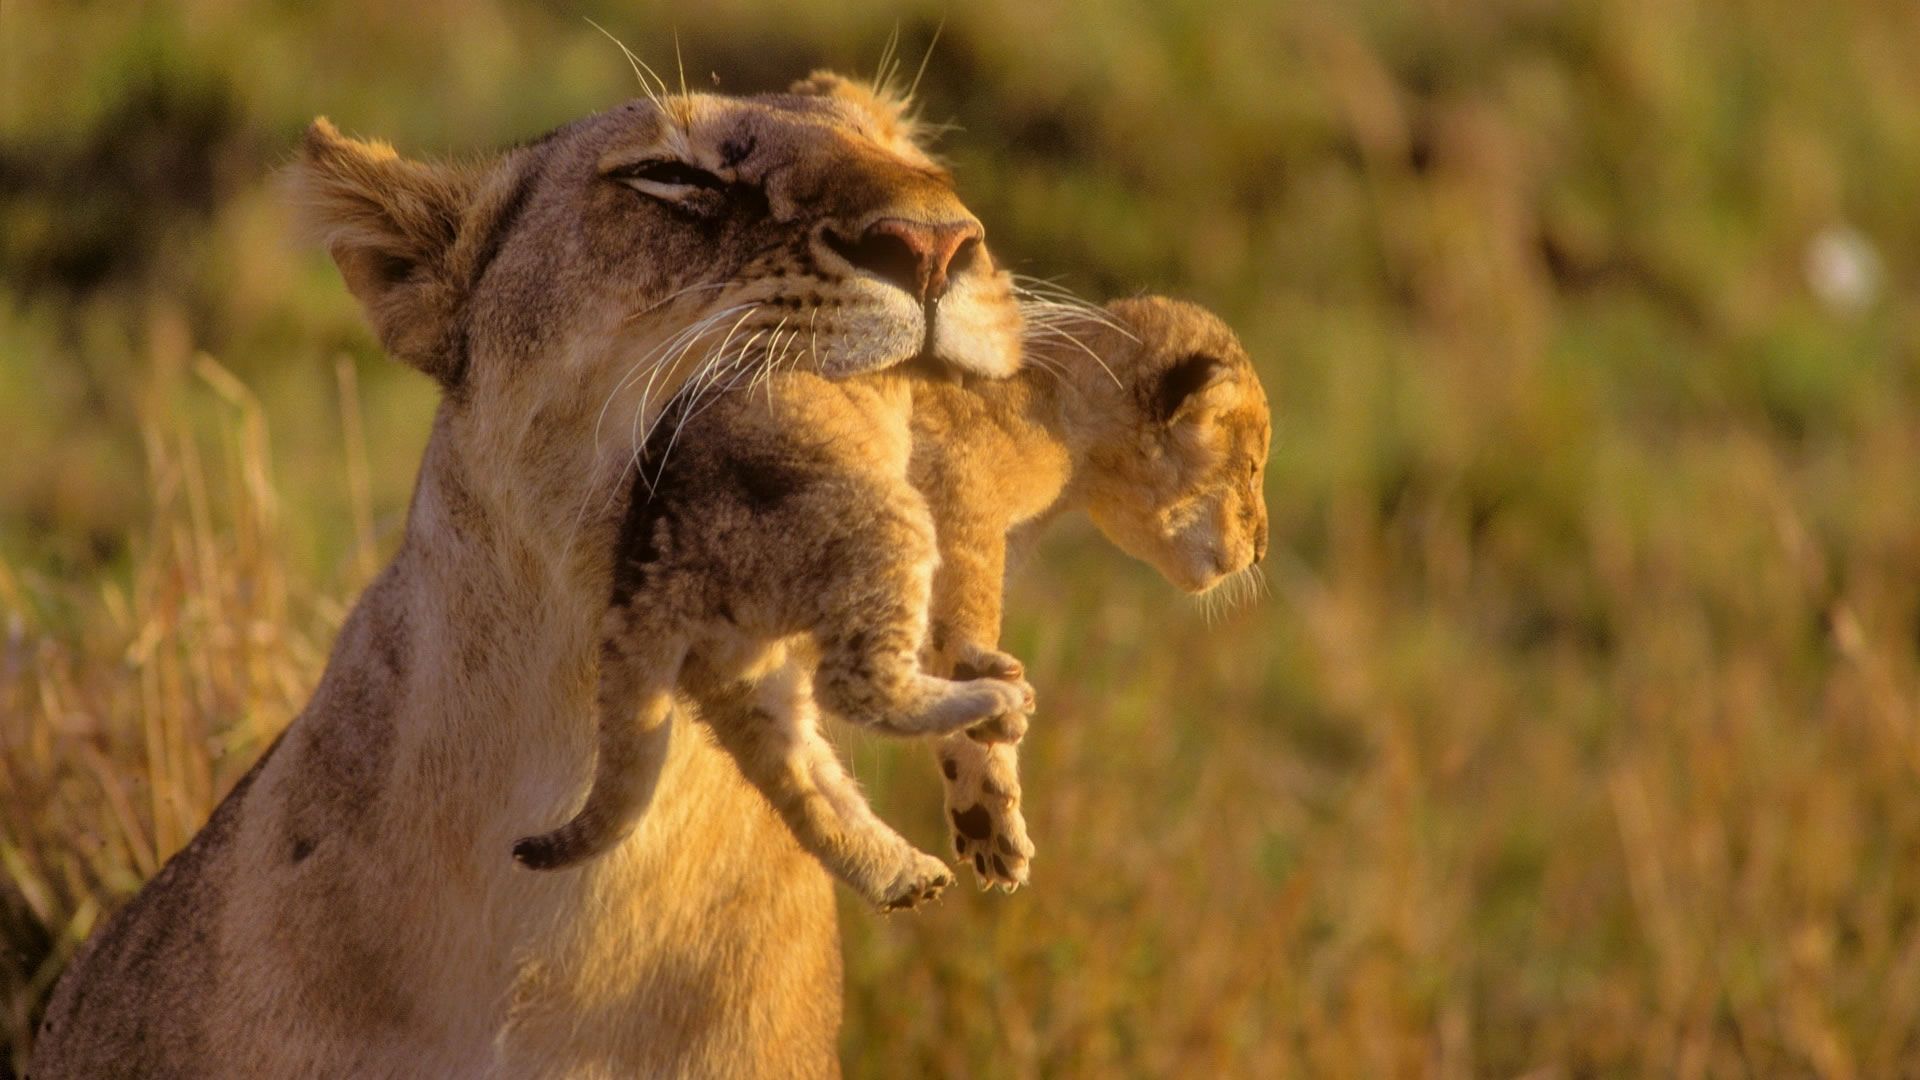 google picture of baby lions.. lion and her baby desktop